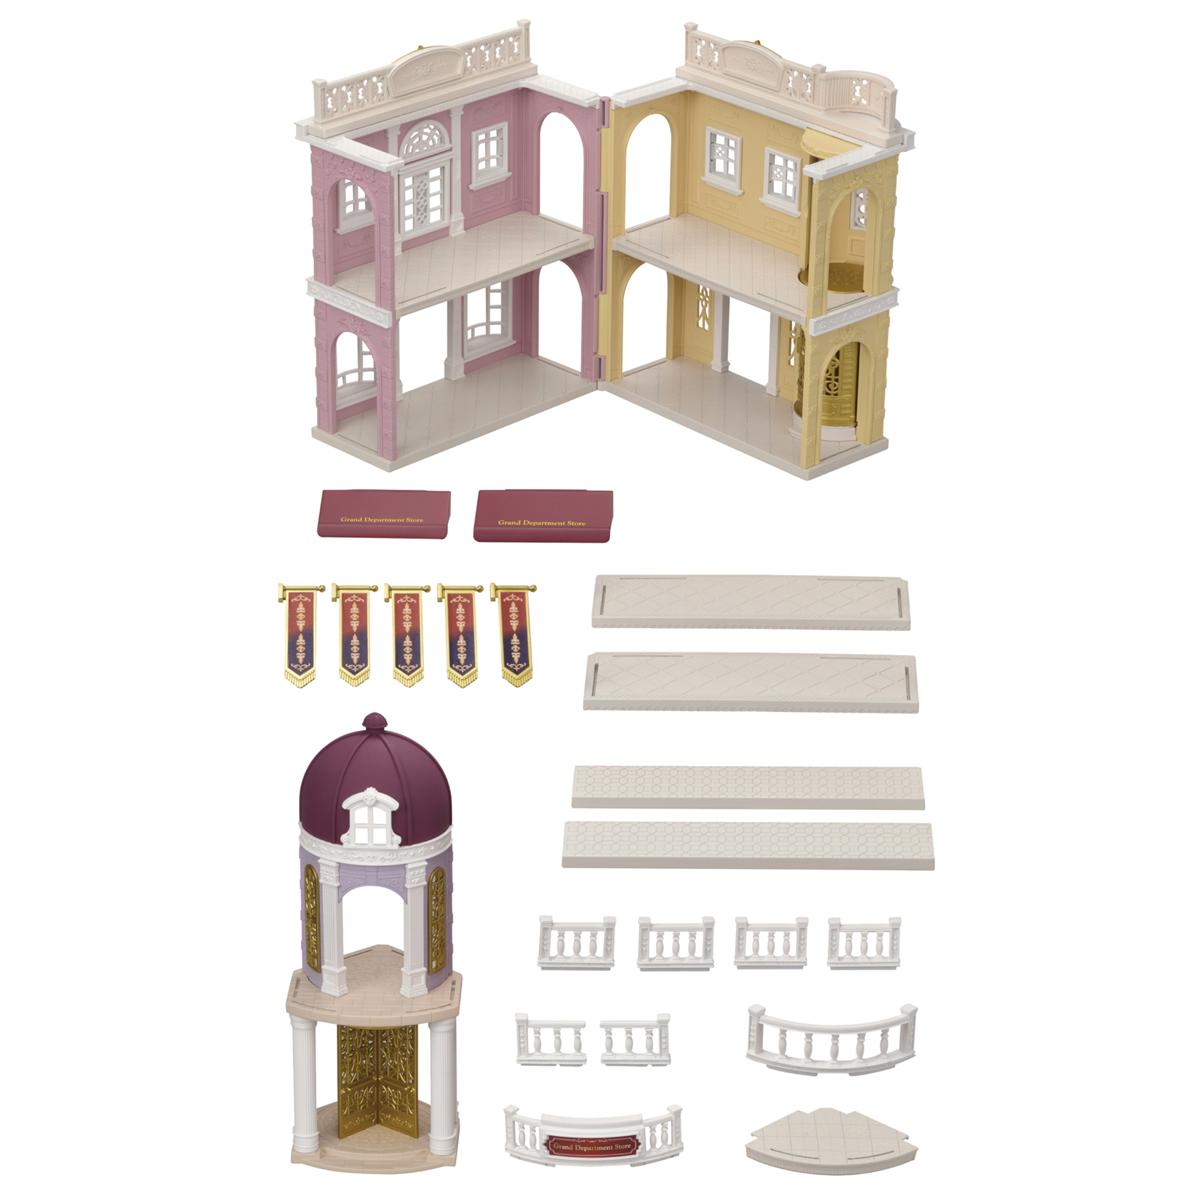 Calico Critters Grand Department Store for $43.89 Shipped